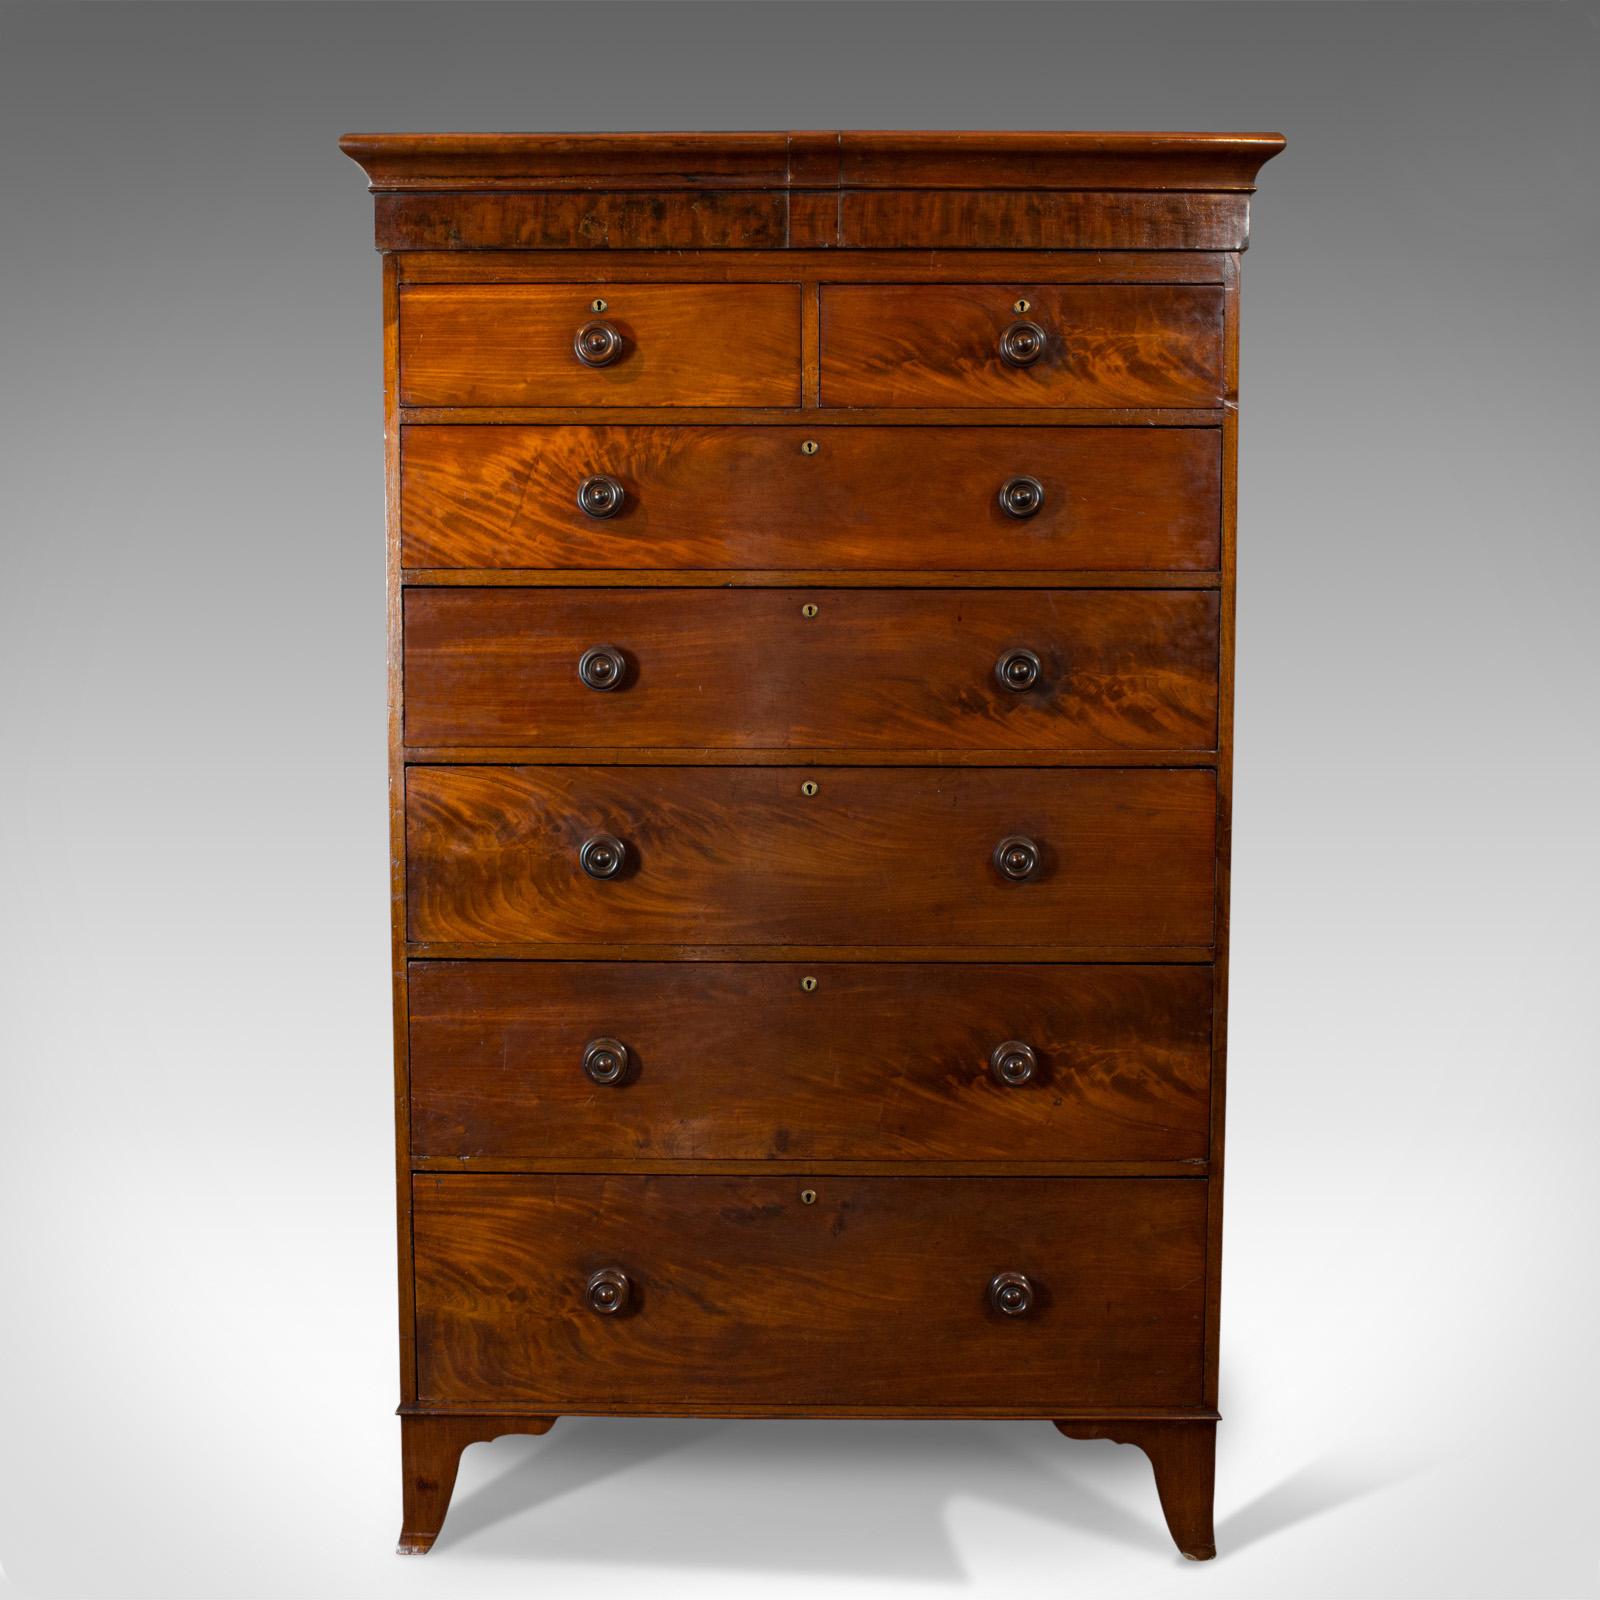 This is an antique tallboy. An English, flame mahogany tall chest of drawers, dating to the early Victorian period of the mid-19th century, circa 1850 and later.

Highly appealing tallboy of elegant proportion
Displaying a desirable aged patina